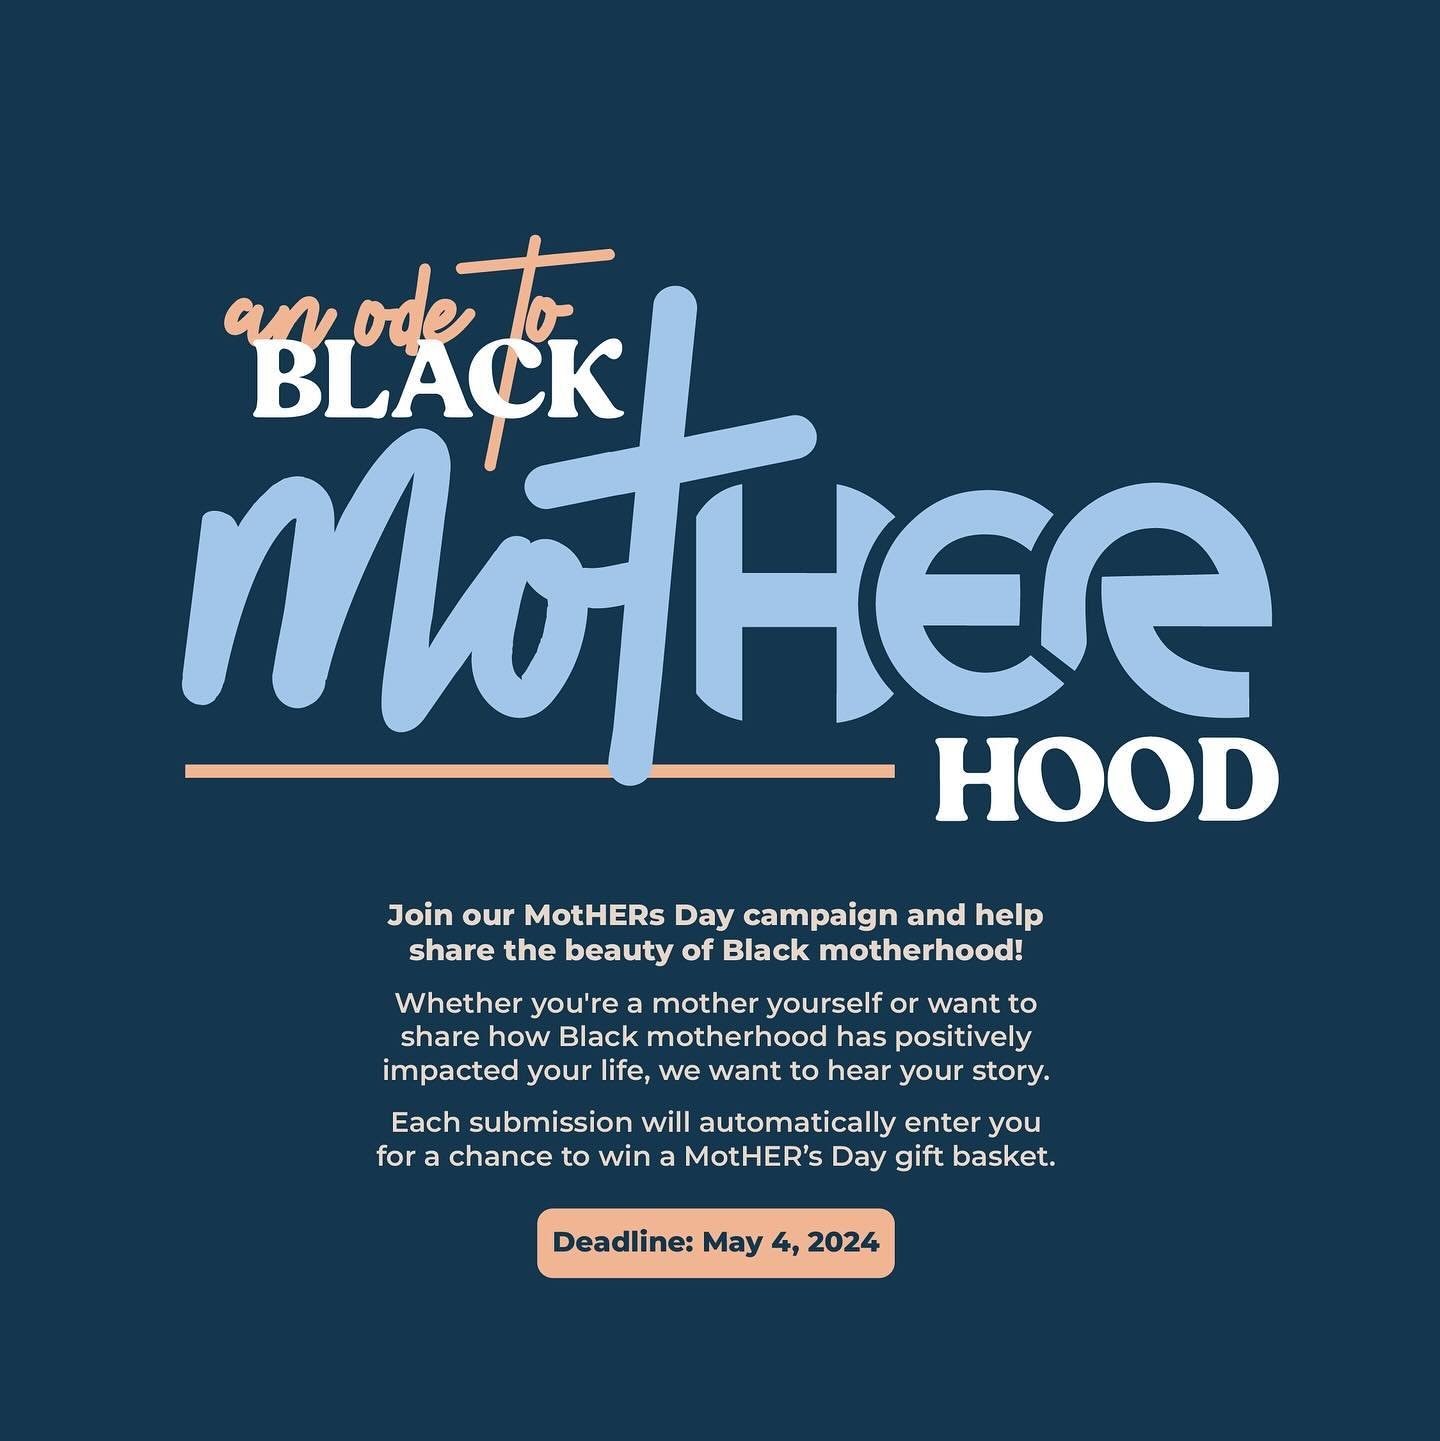 Today's the last day to enter our motHER's Day contest! 💙

Whether you're a Black mother yourself or the power of Black motherhood has inspired you, we want to hear from you!

Answer one question on our submission form at hercollectiverva.com/mother